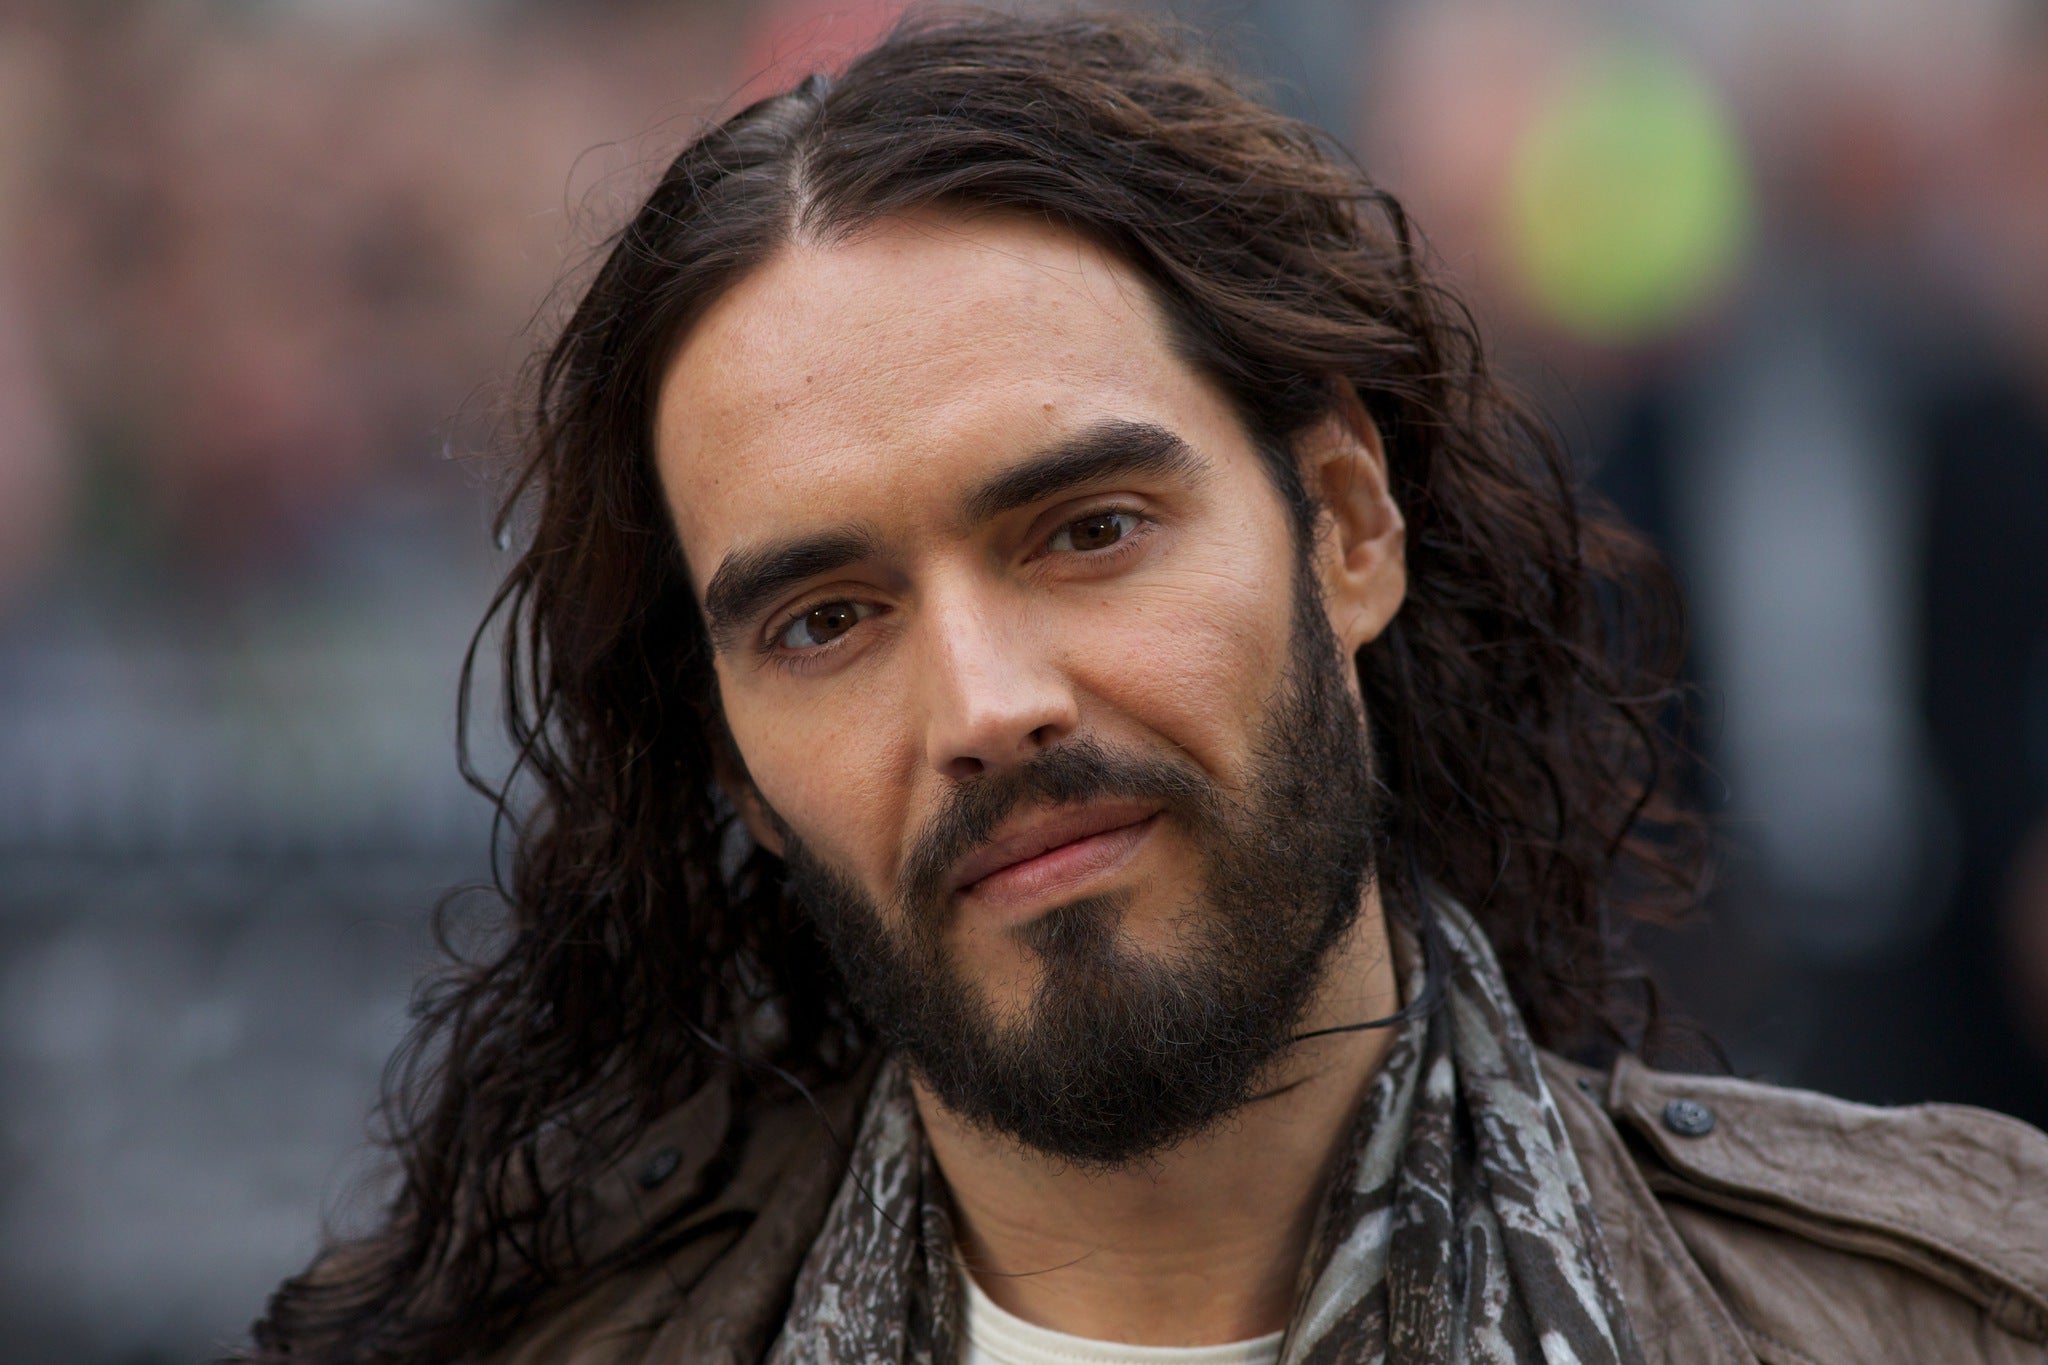 Russell Brand allowed filmmakers complete access to his personal and private life